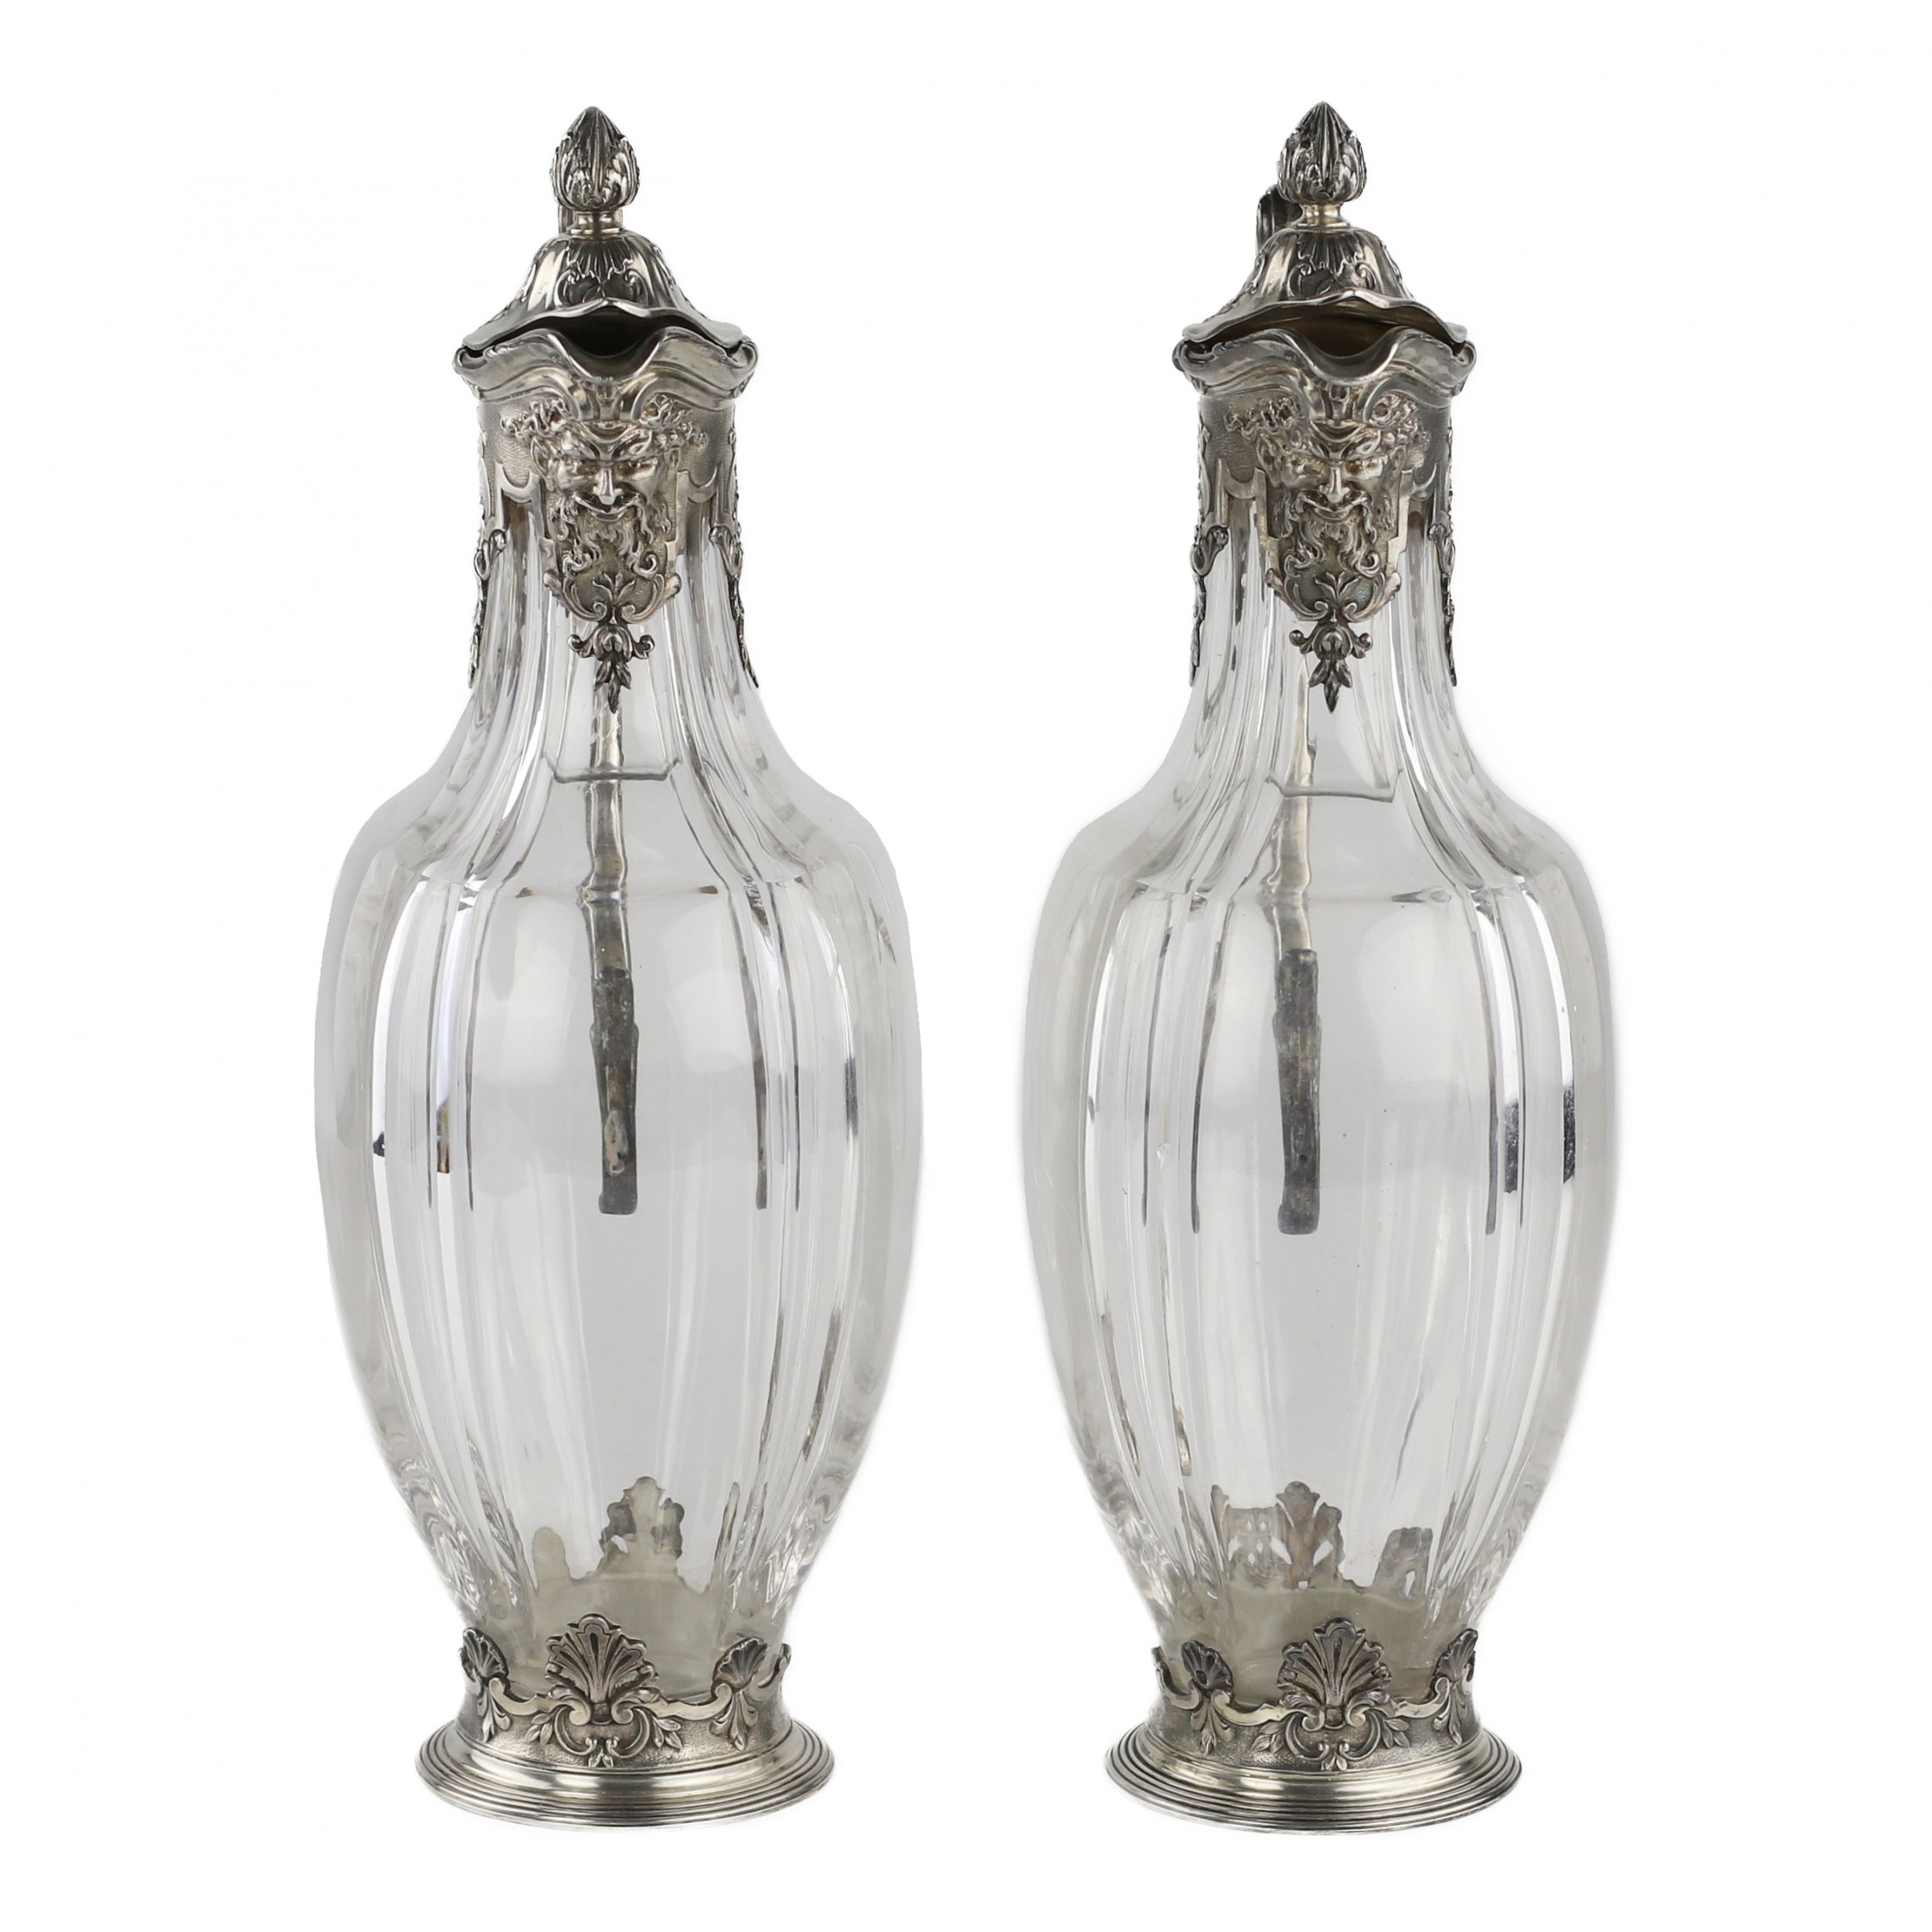 A pair of glass Regency style jugs in silver from CHRISTOFLE. - Image 2 of 9